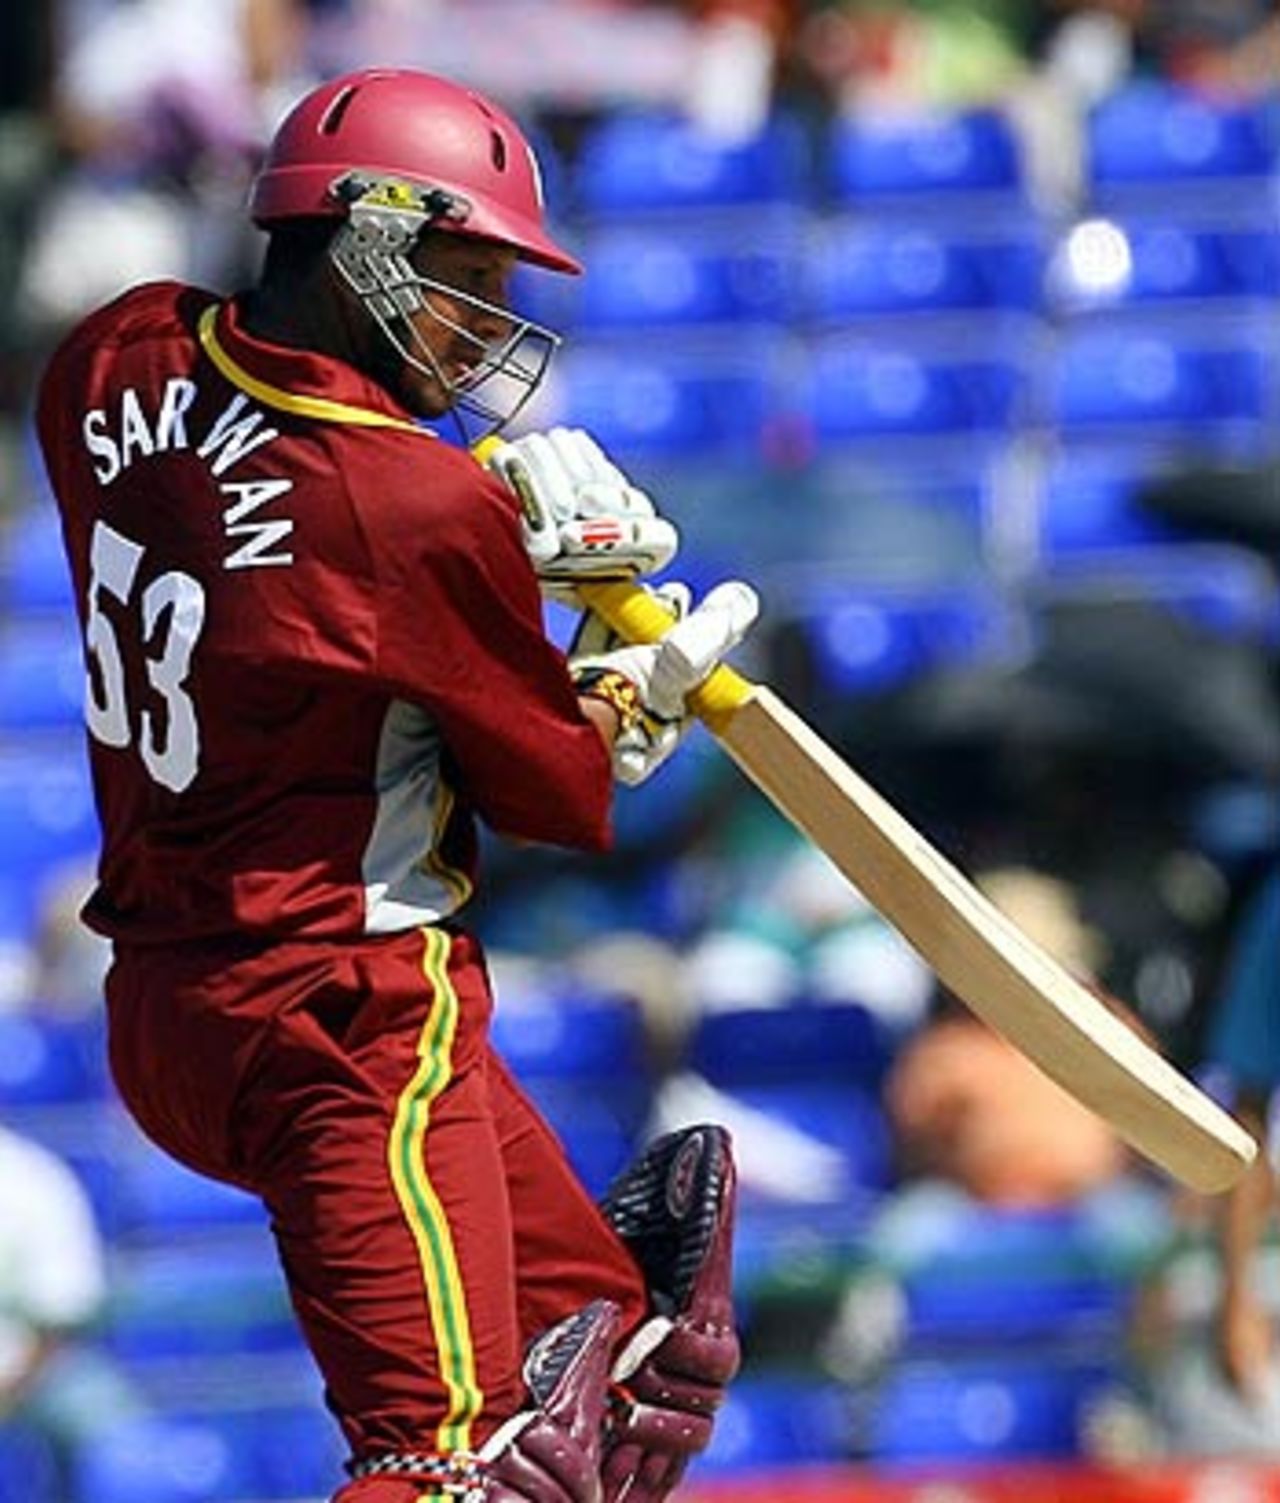 Ramnaresh Sarwan cuts during his unbeaten 115 in St Kitts, West Indies v India, 3rd ODI, St Kitts, May 23, 2006